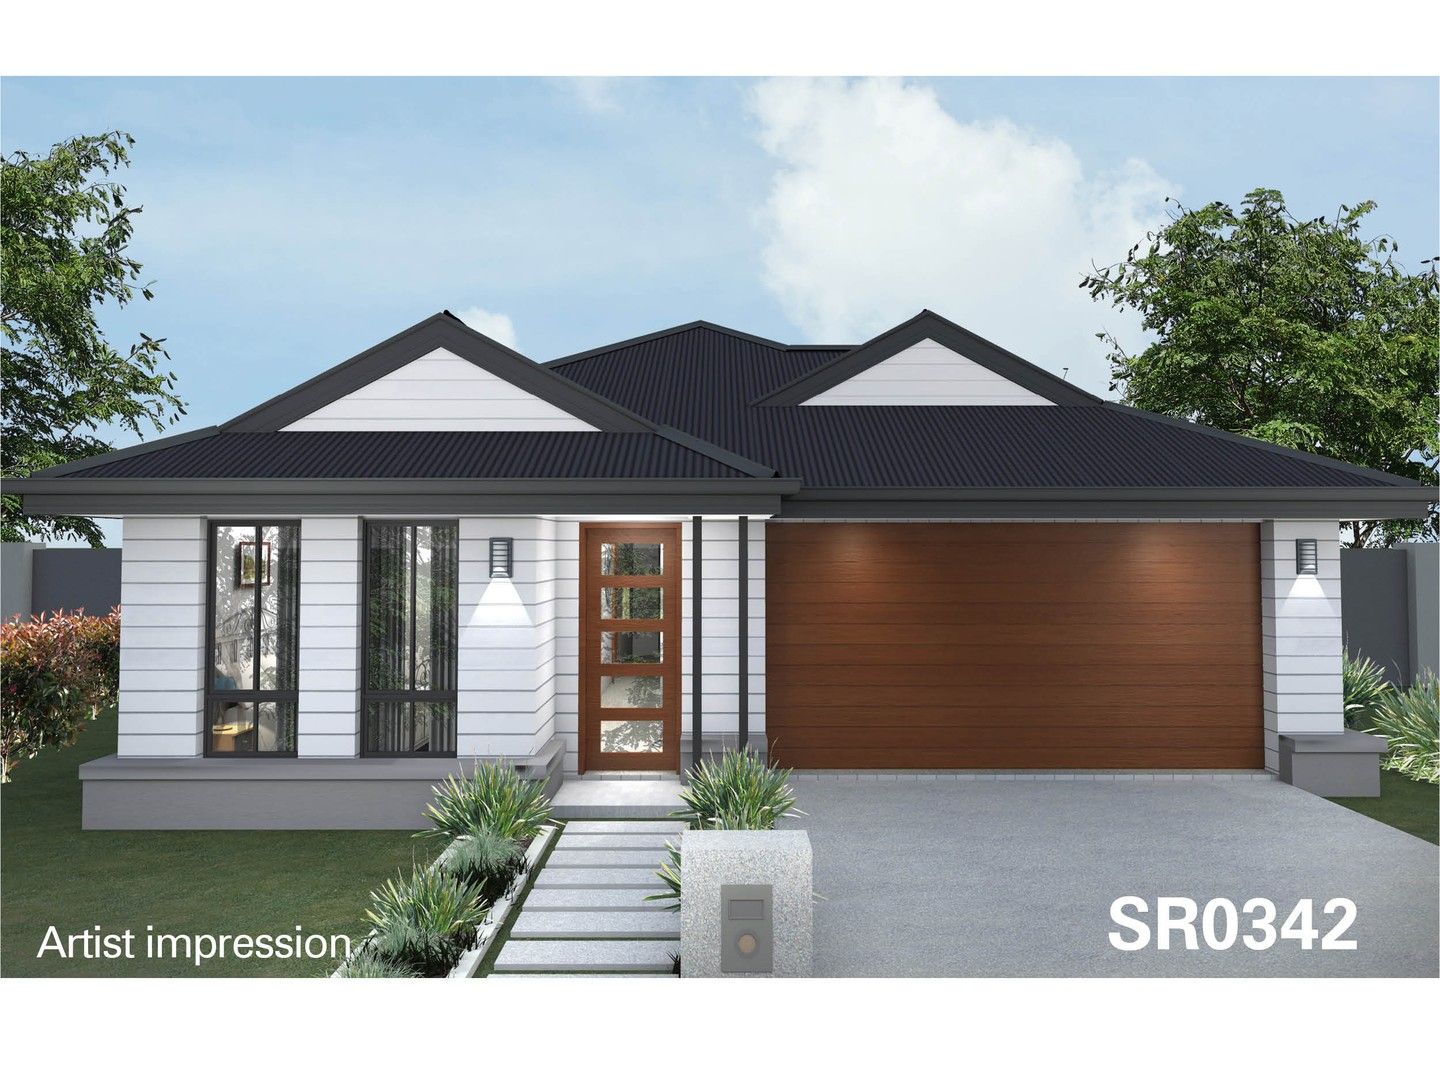 4 bedrooms New House & Land in Lot 2 Pumicestone Pocket CABOOLTURE QLD, 4510